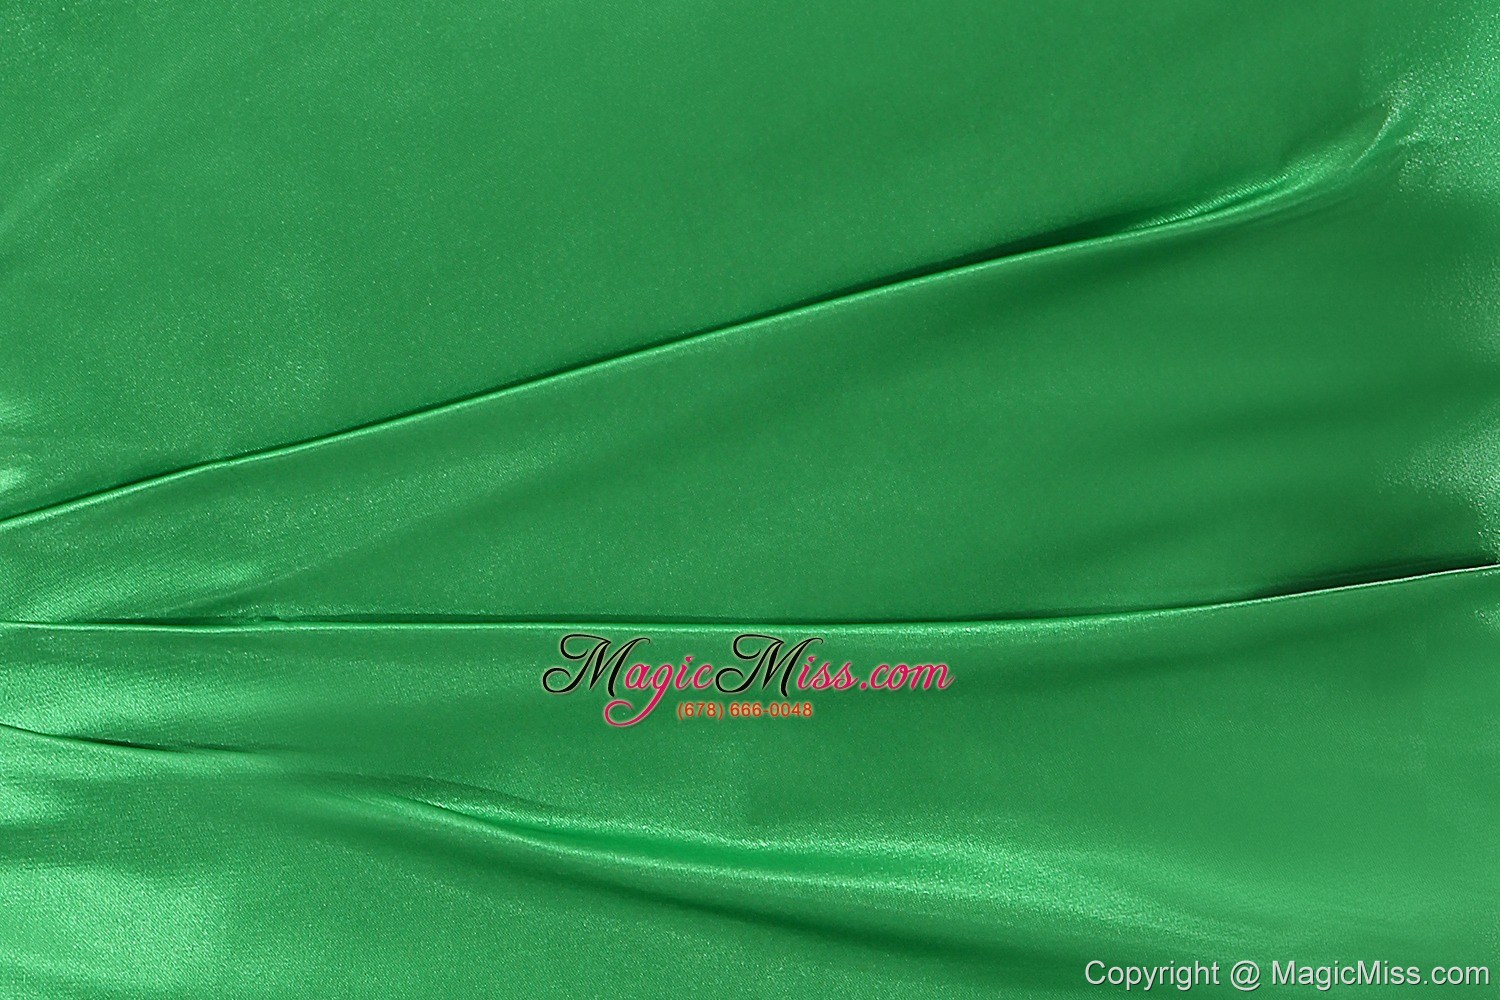 wholesale unique spring green mermaid prom dress one shoulder brush train elastic woven satin ruch